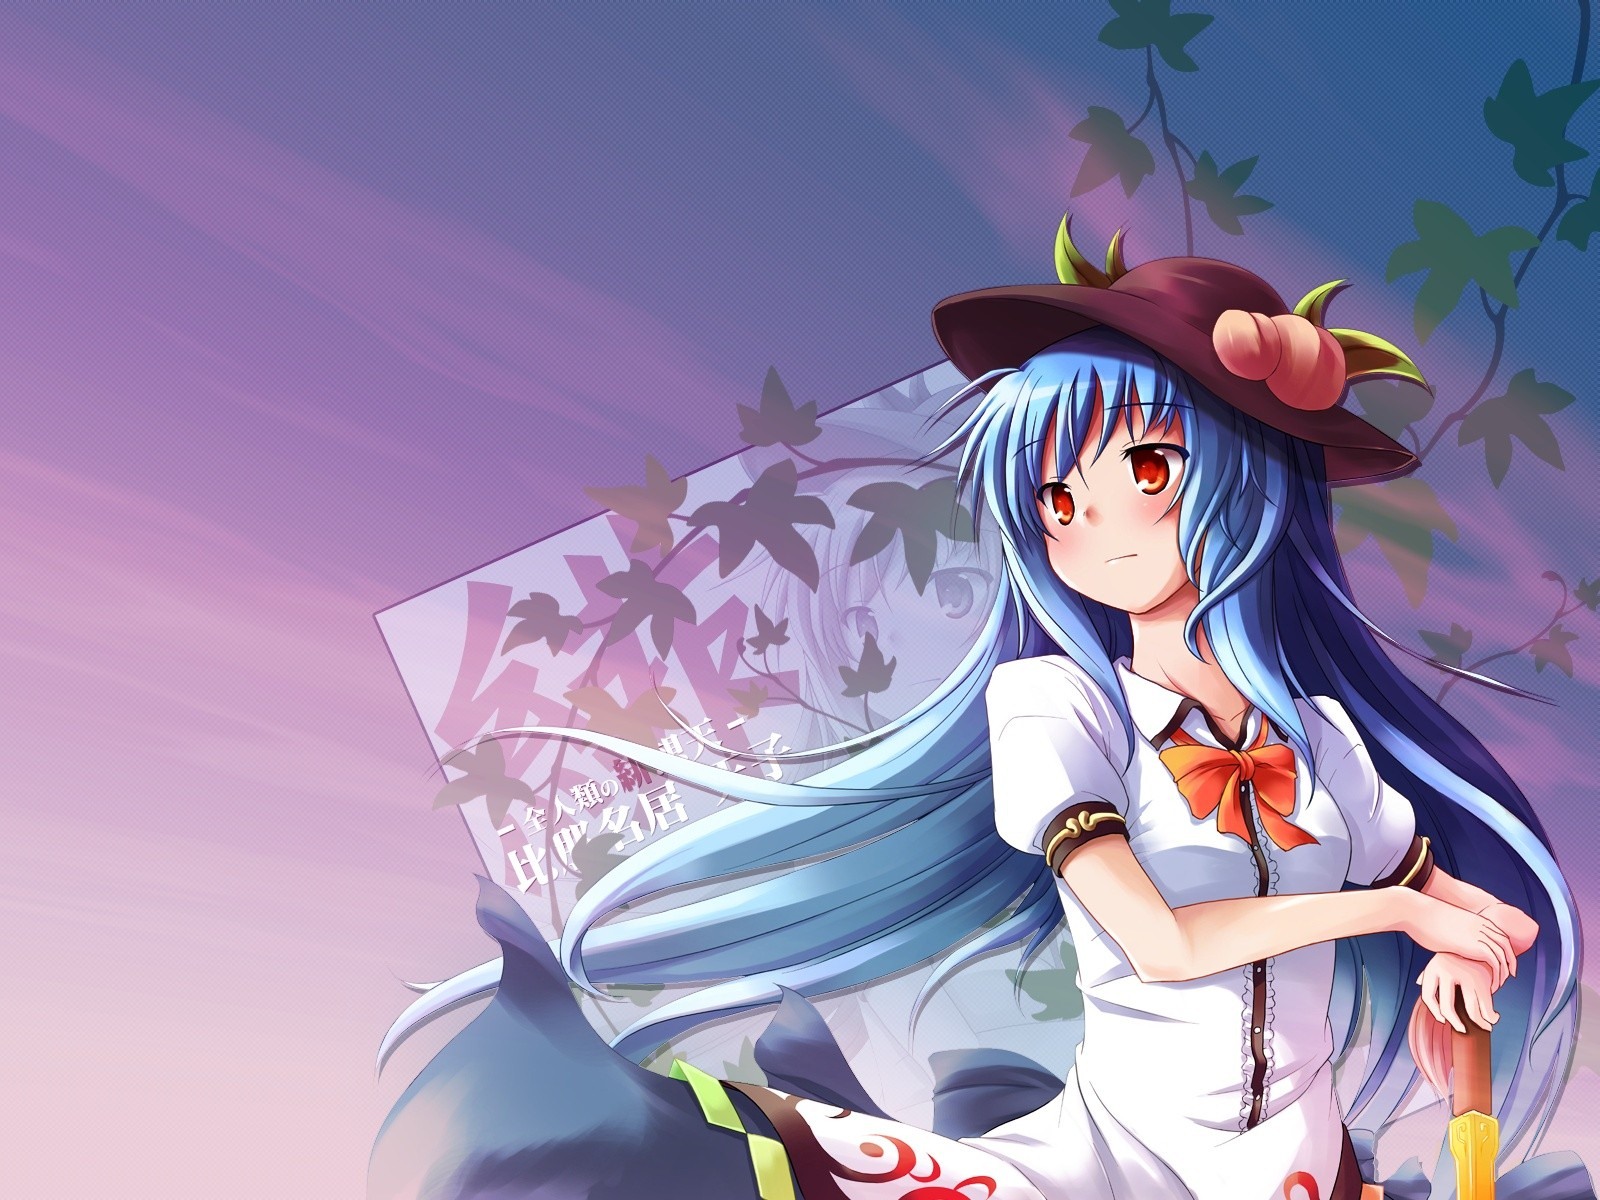 Touhou Project caricature HD wallpapers #16 - 1600x1200